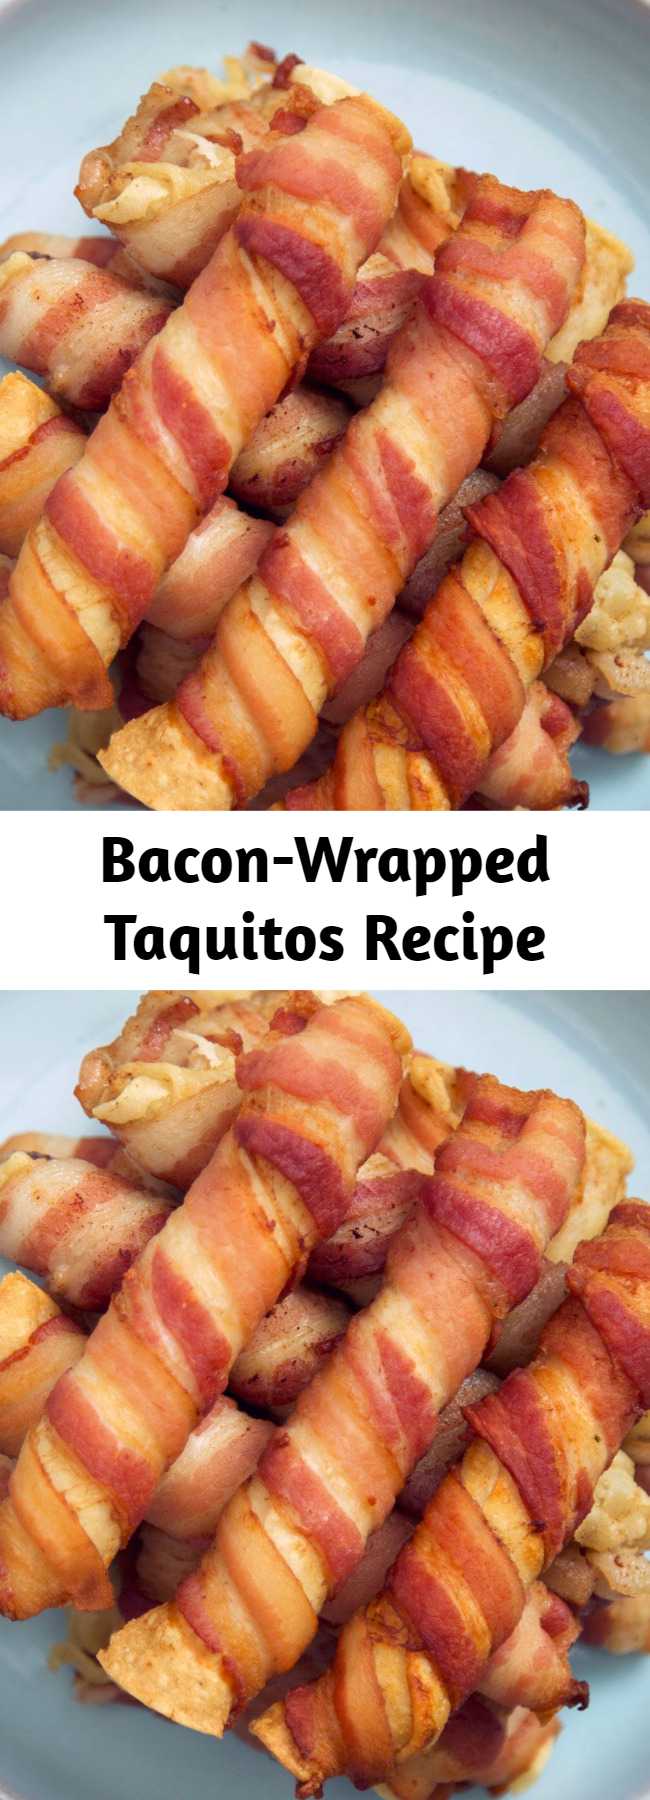 Bacon-Wrapped Taquitos Recipe - Ordinary chicken taquitos are fine, but an extra wrapping of bacon is like trying them again, for the first time.